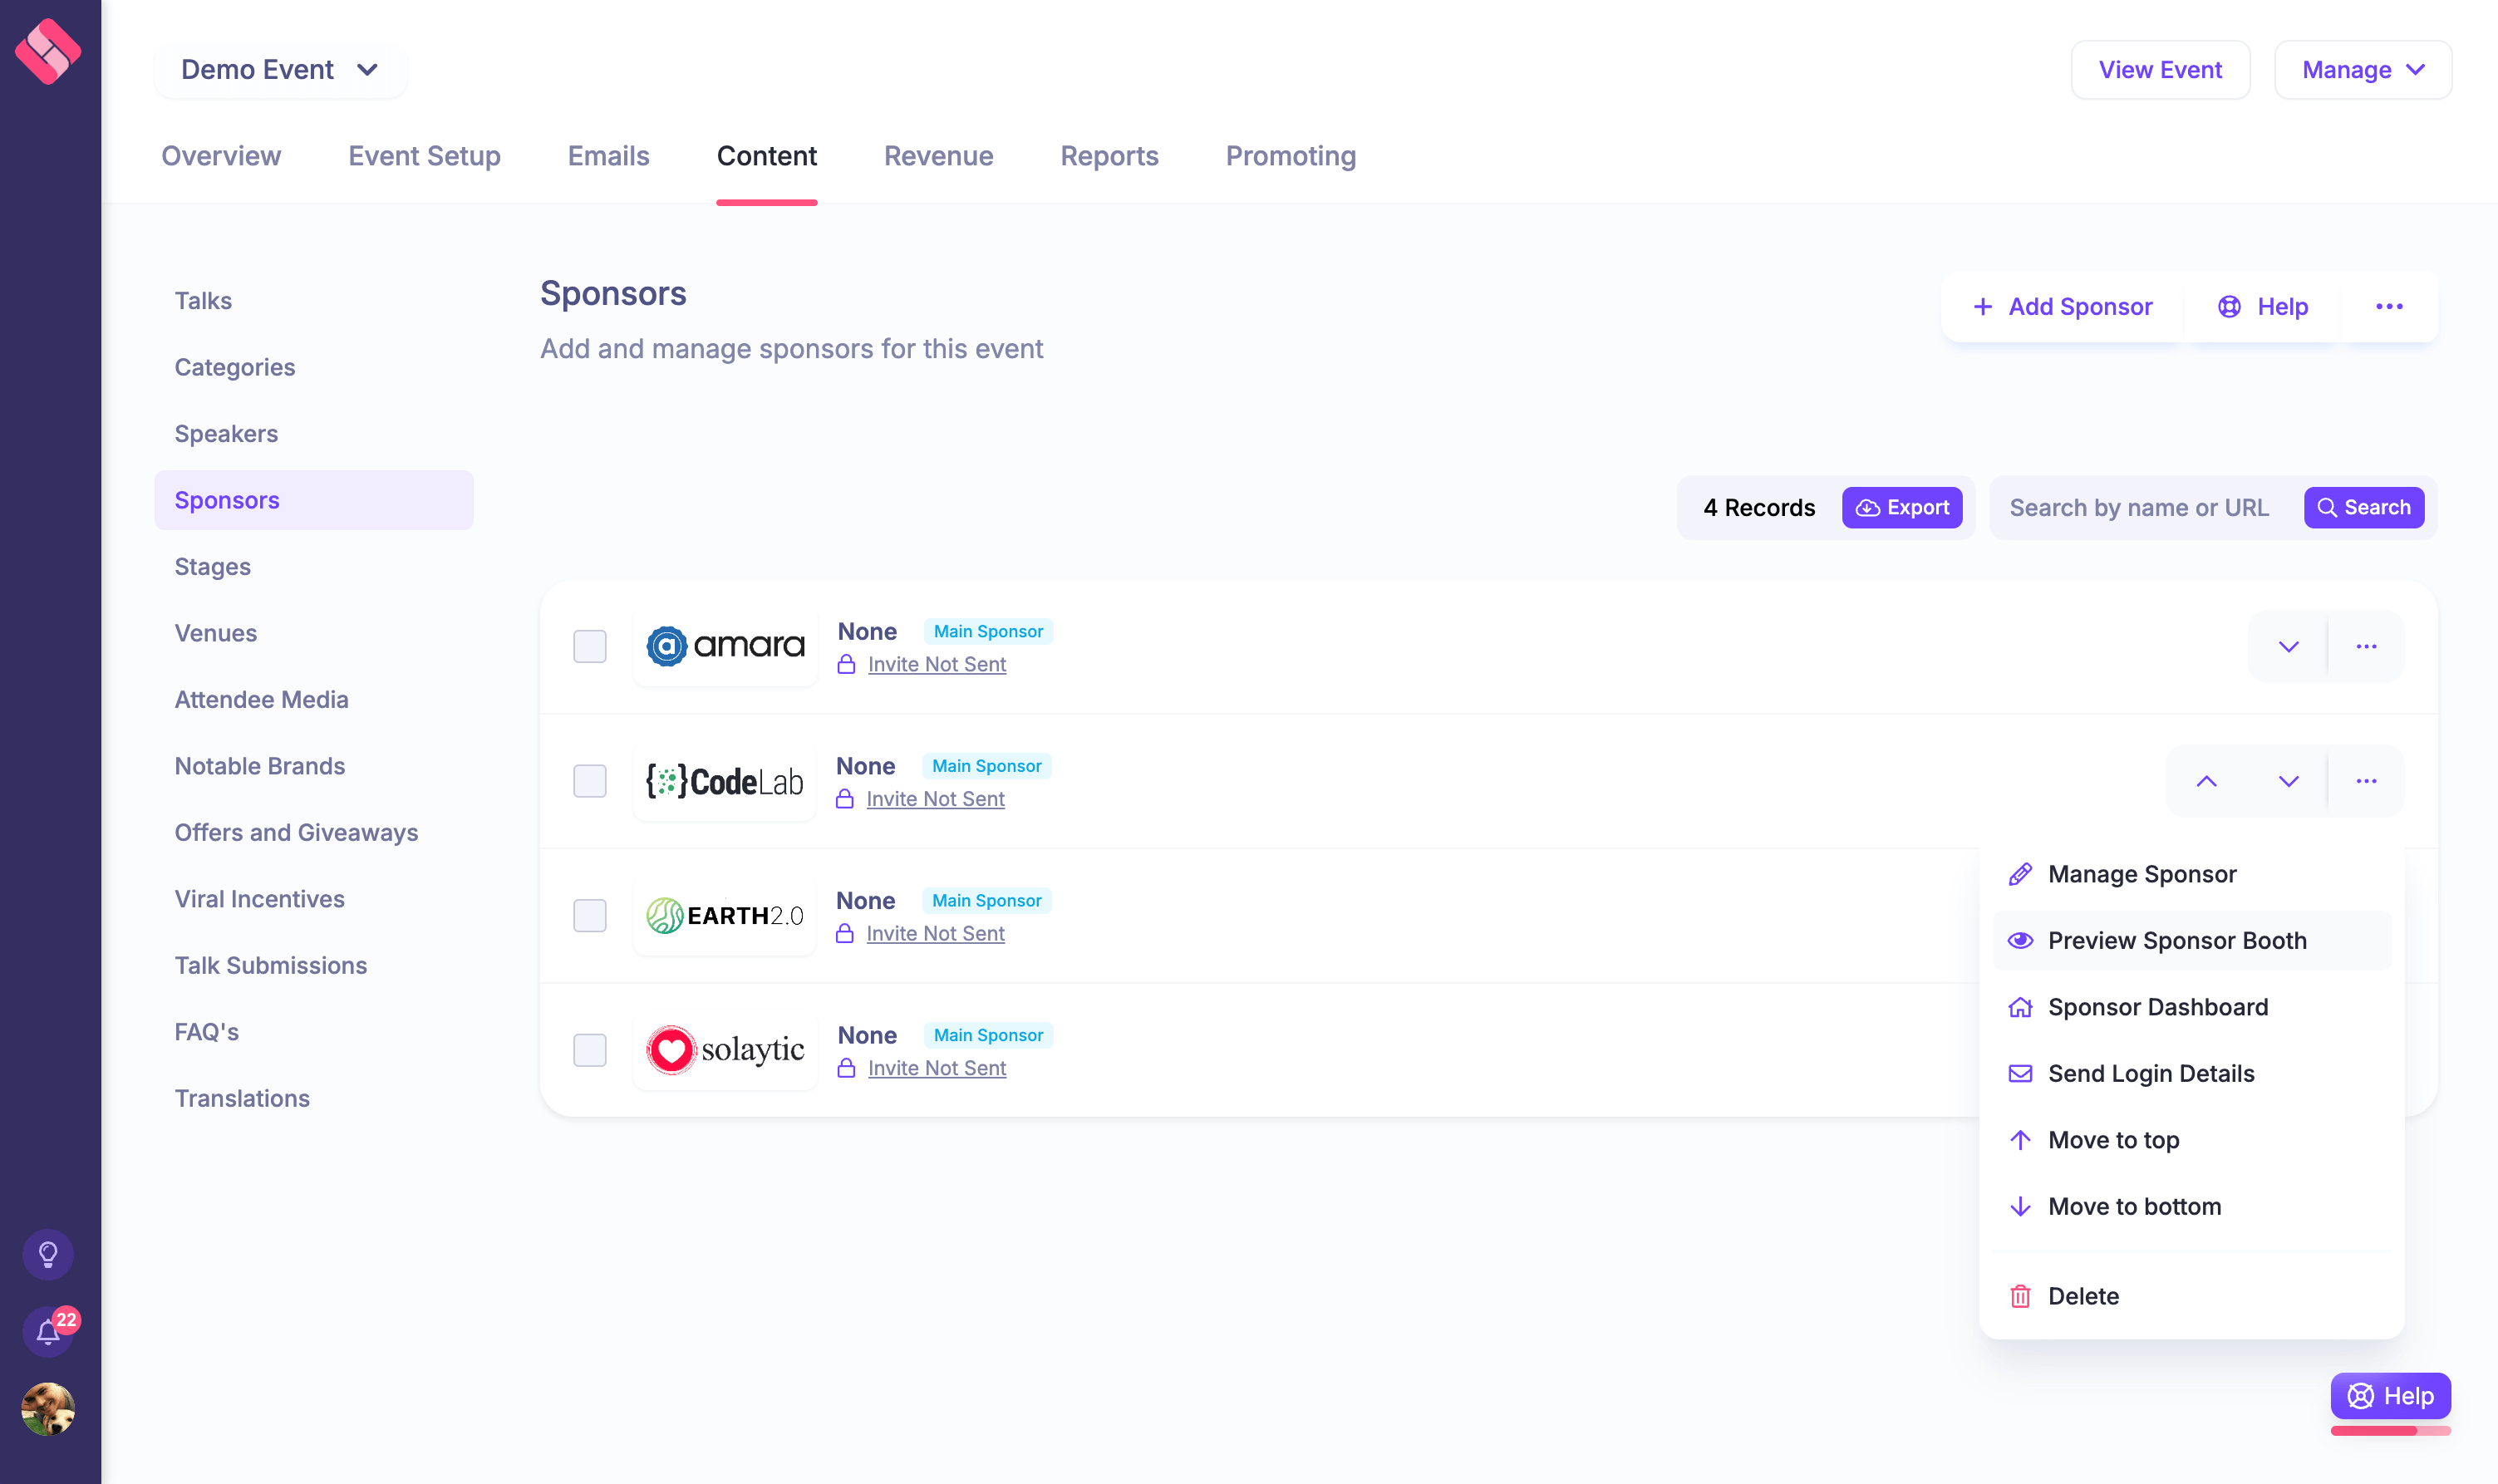 Manage sponsors from one centralised list. Easily update their details, invite them to access their private dashboard, and more.